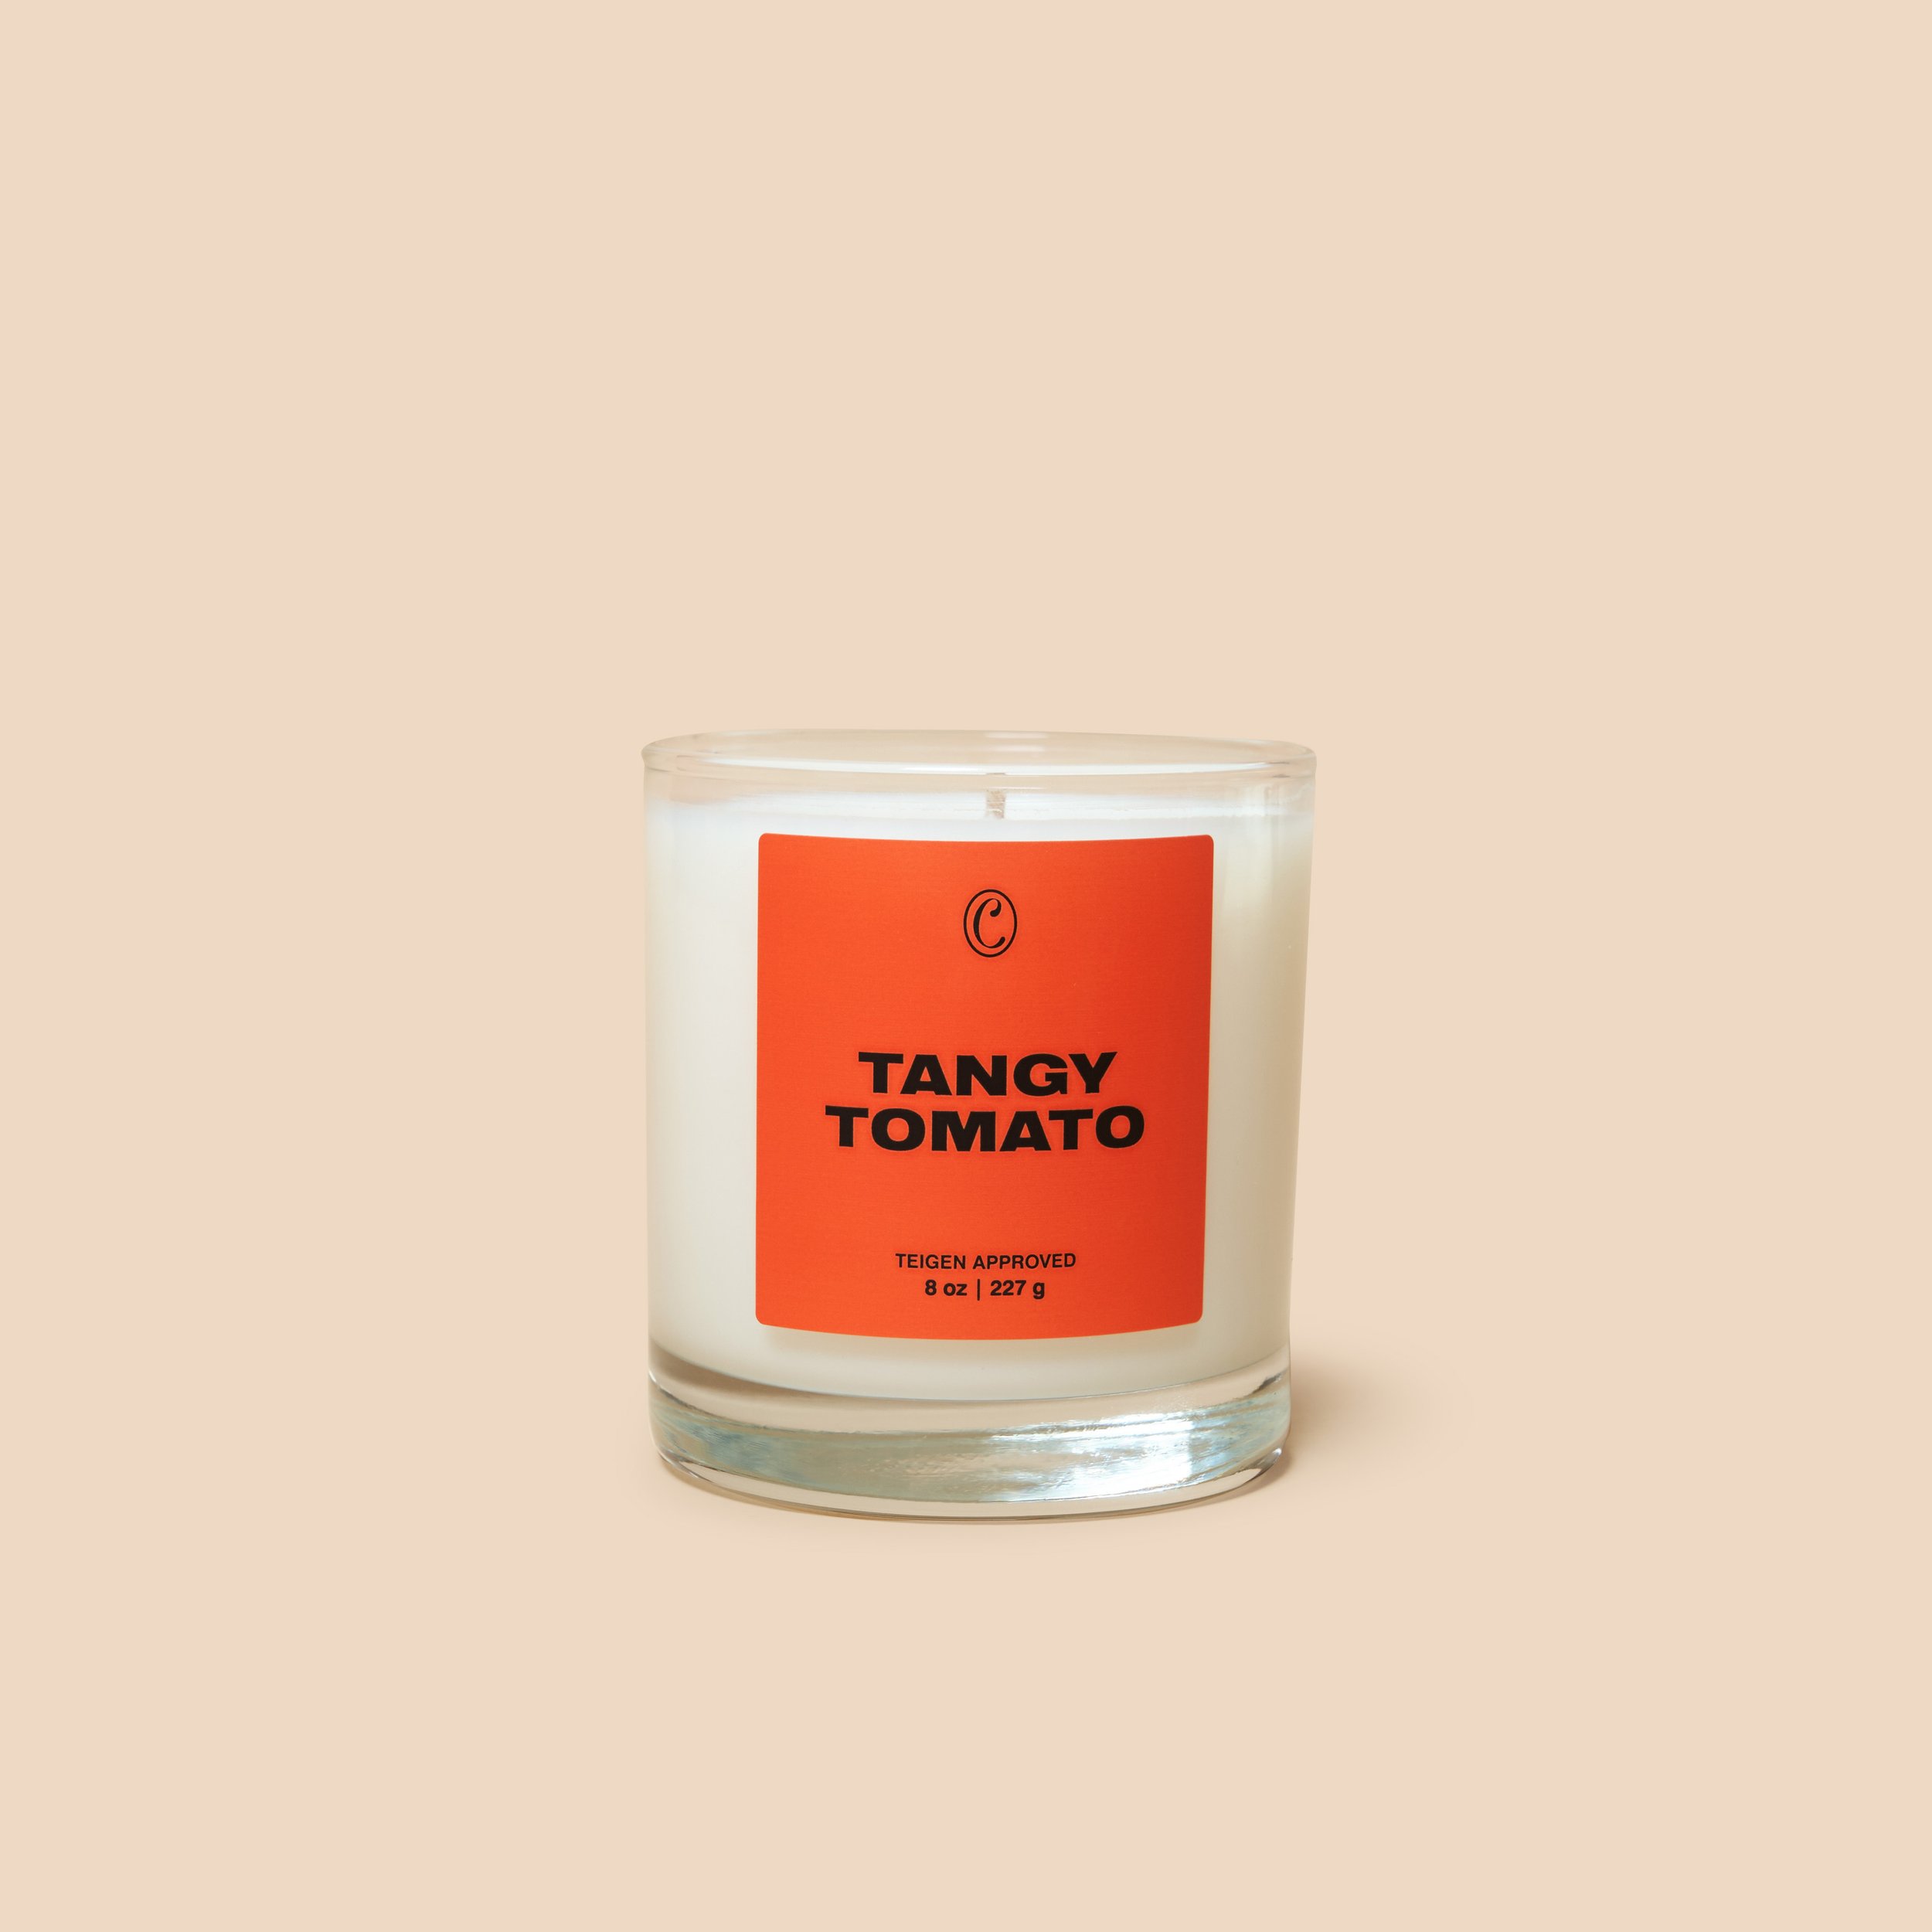 Tangy Tomato candle_1x1.jpg